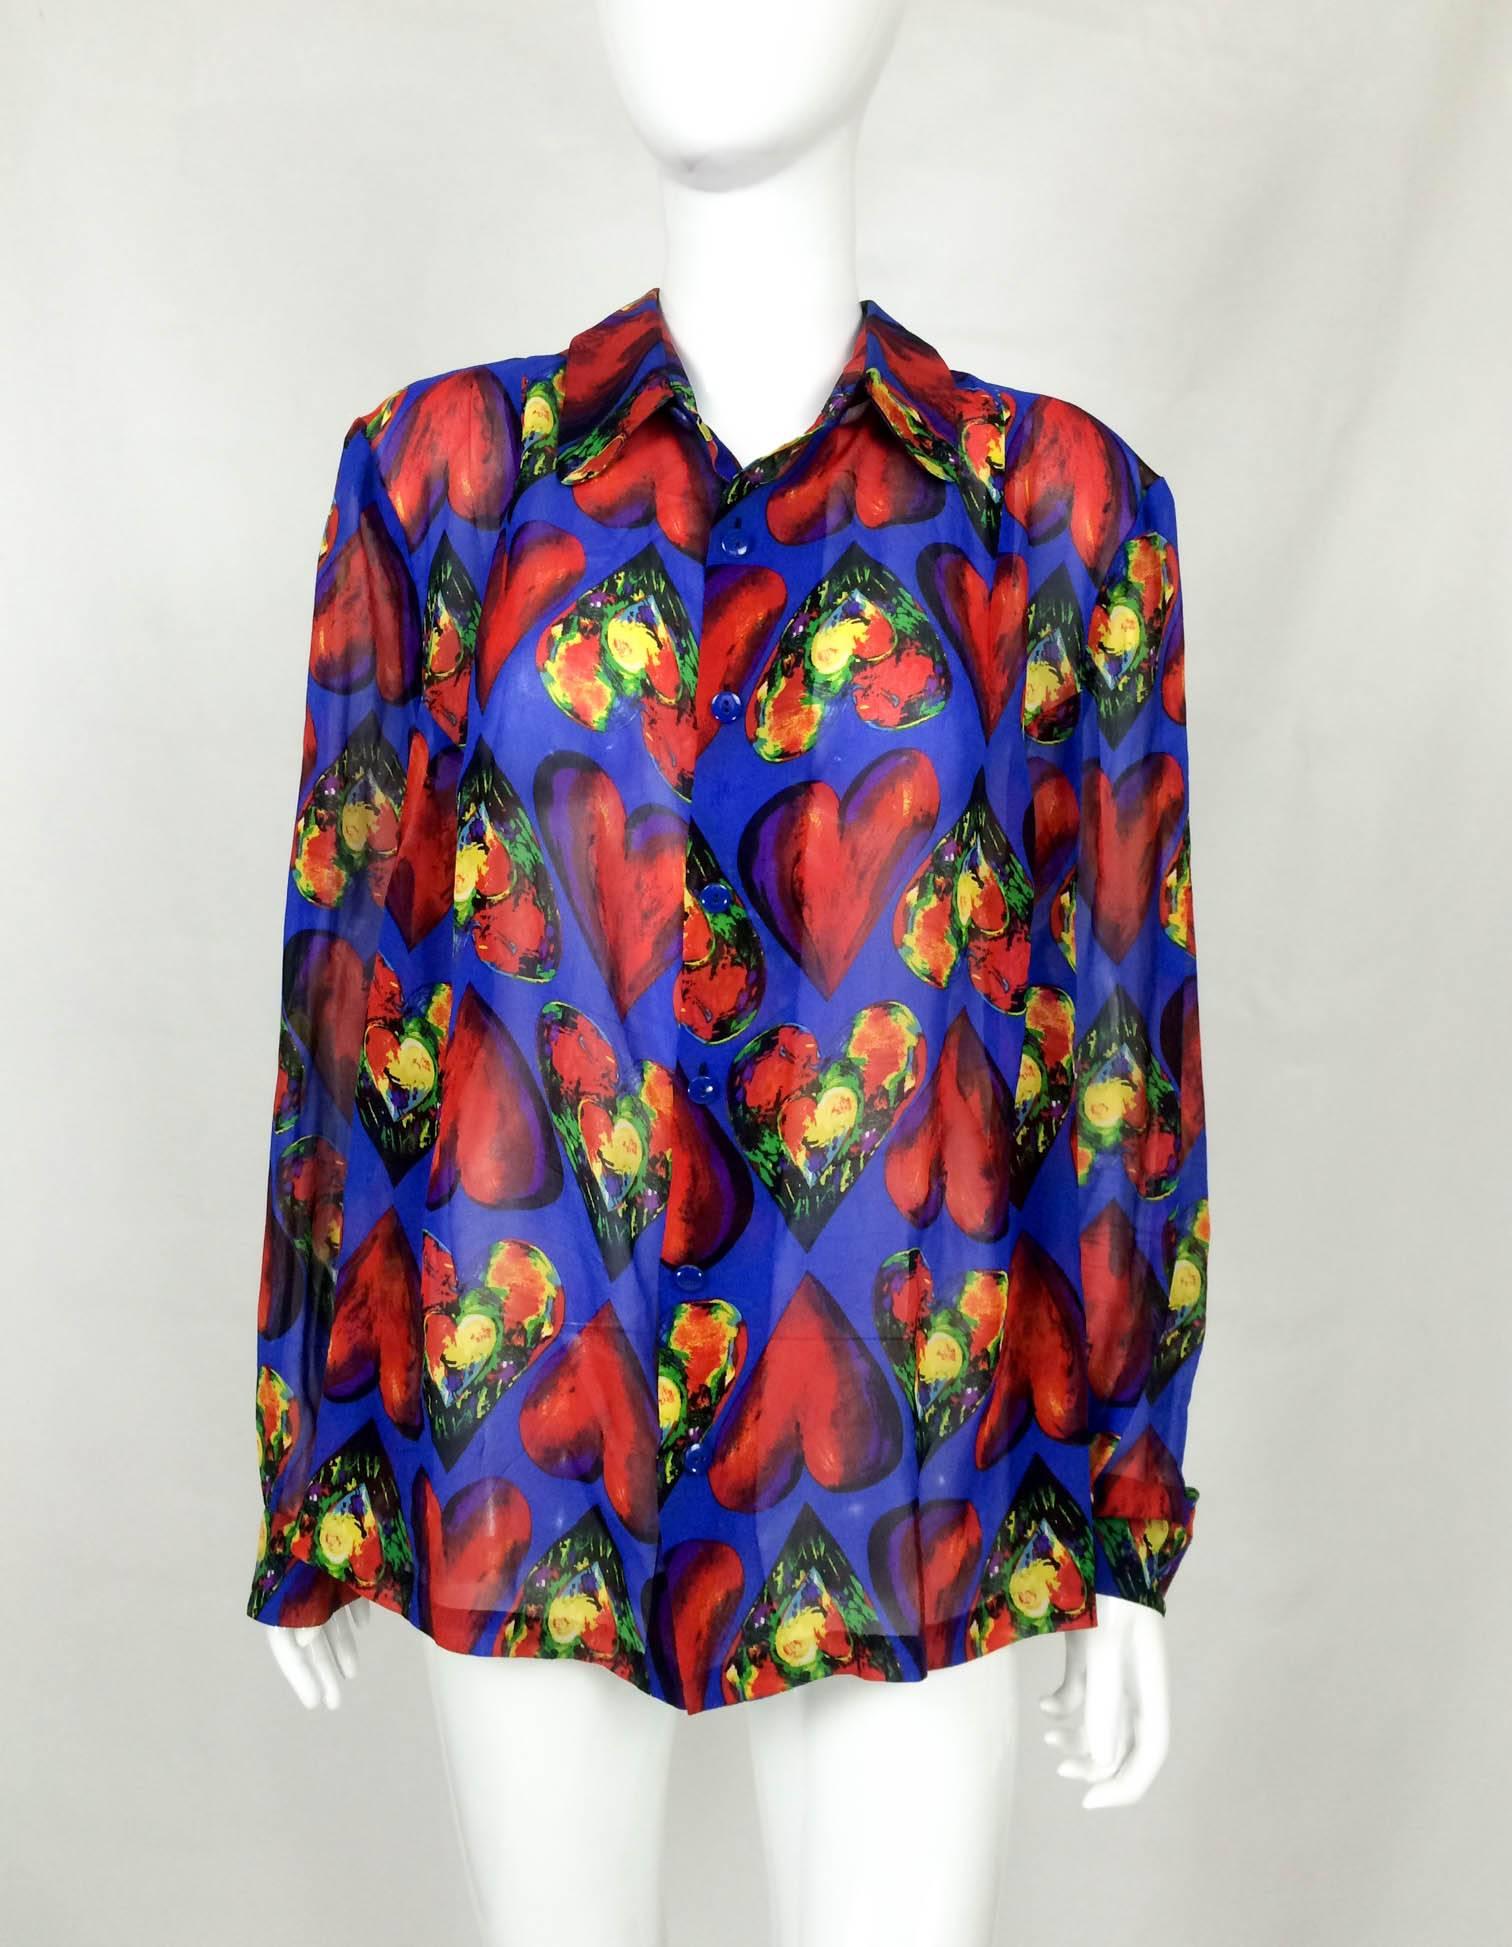 Fun Gianni Versace Chiffon Shirt. This stunning and jazzy chiffon blouse is from the Gianni Versace 1997 Menswear Spring Collection (catalogue 32). However, I do feel that it would look just as great on a woman as a loose sexy shirt, hence it being